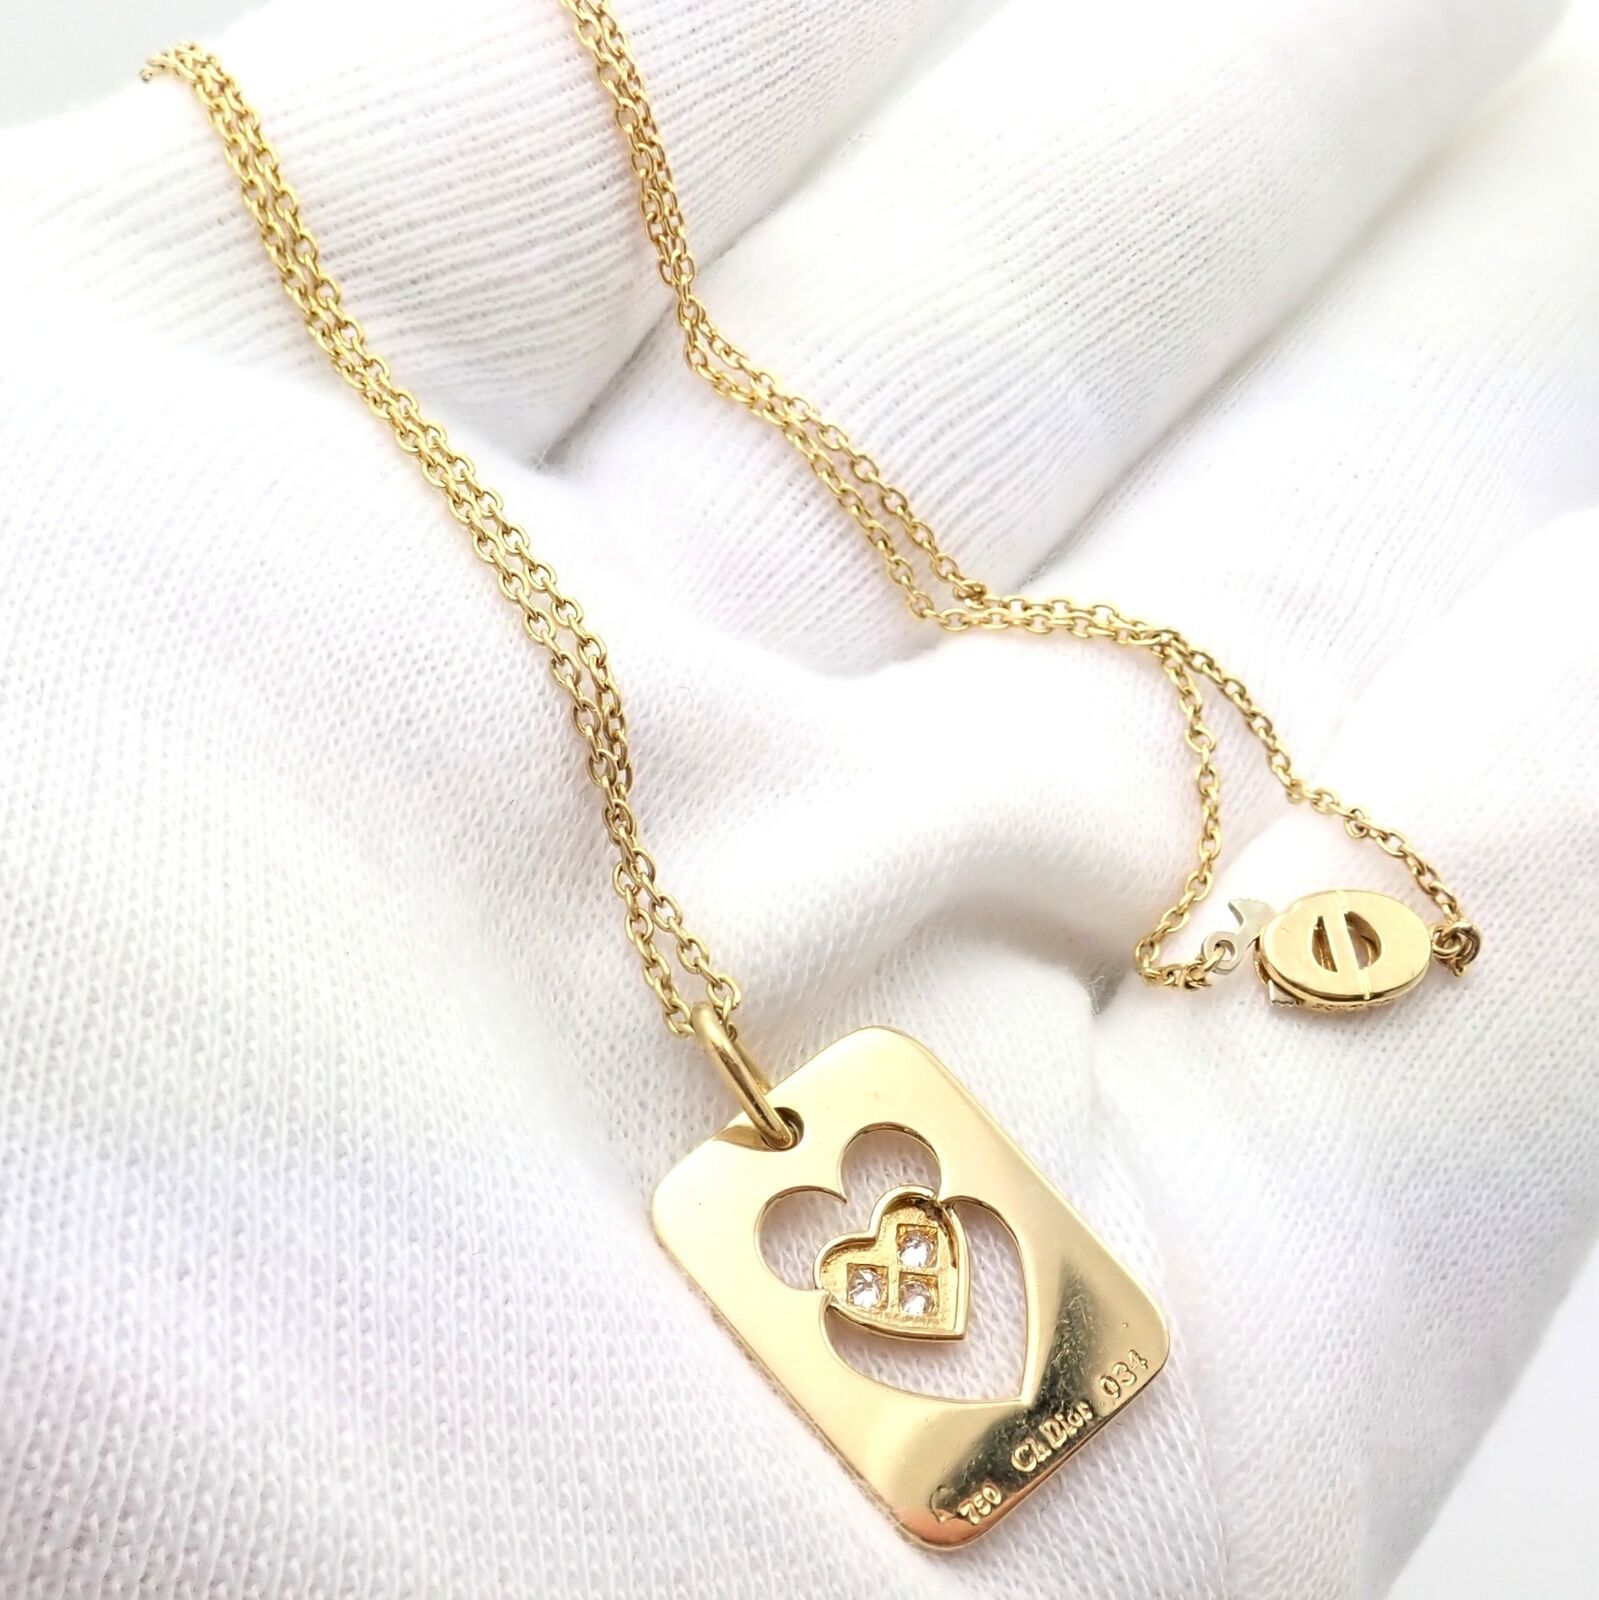 Christian Dior Jewelry & Watches:Fine Jewelry:Necklaces & Pendants Rare! Christian Dior 18k Yellow Gold Diamond Ace Of Hearts Card Pendant Necklace